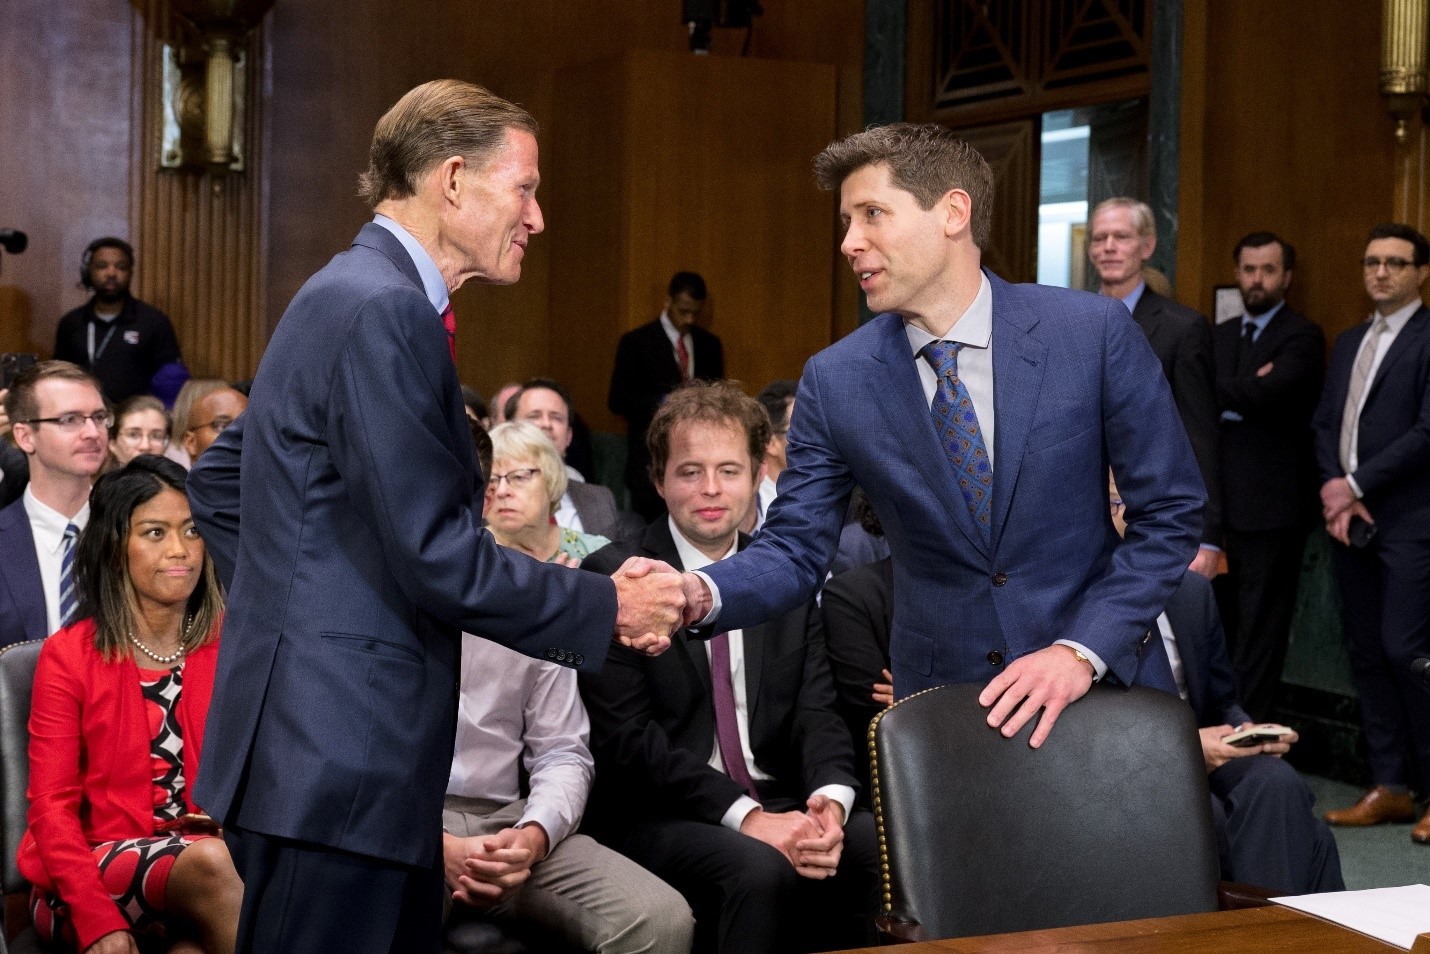 U.S. Senator Richard Blumenthal (D-CT), Chair of the Senate Judiciary Subcommittee on Privacy, Technology, and the Law, convened a hearing titled, “Oversight of AI: Rules for Artificial Intelligence.” 